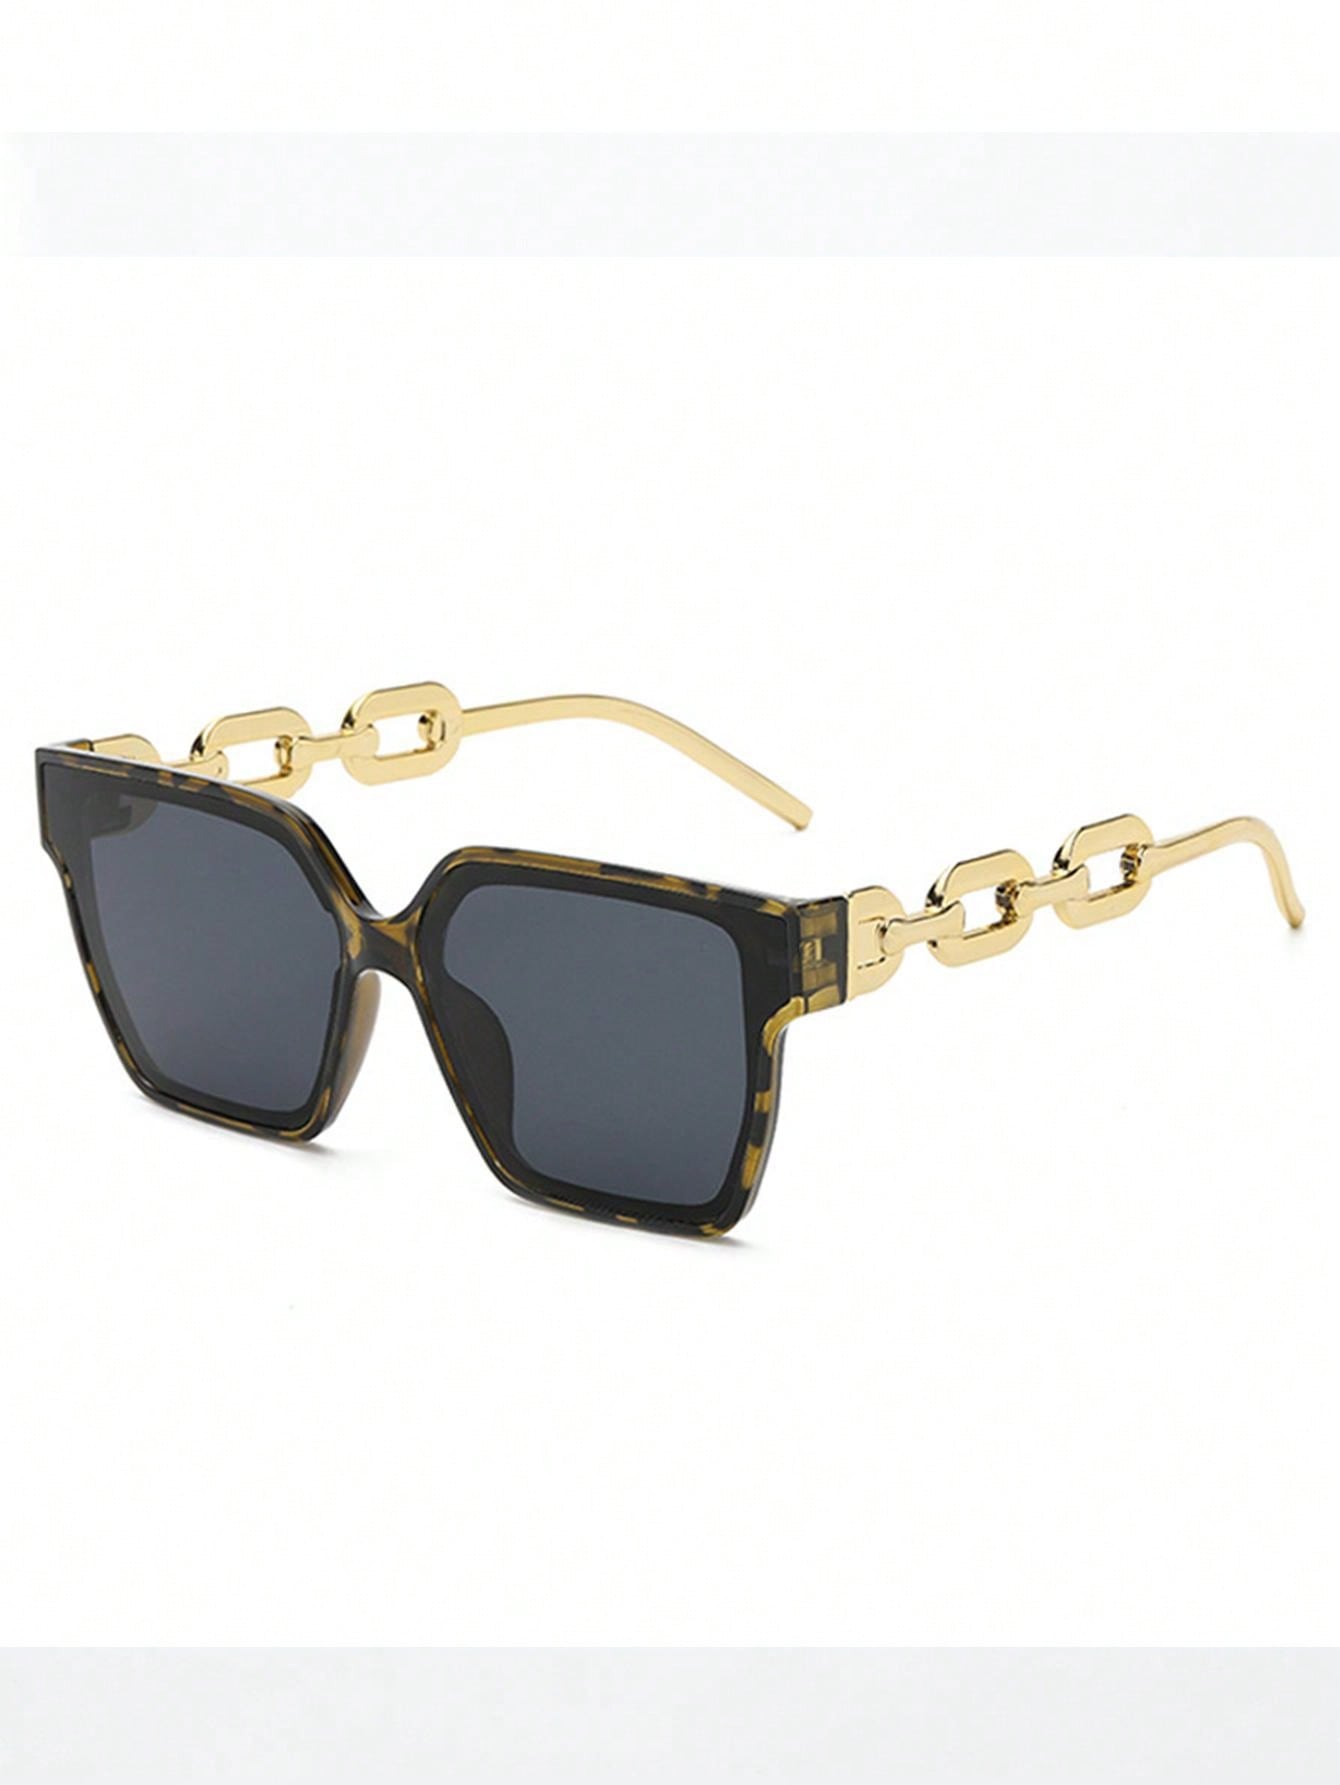 Unisex Vintage Square Frame Stylish Eyeglasses With Chain Decoration - Suitable For Fashionable Travel Street Snap And Runway